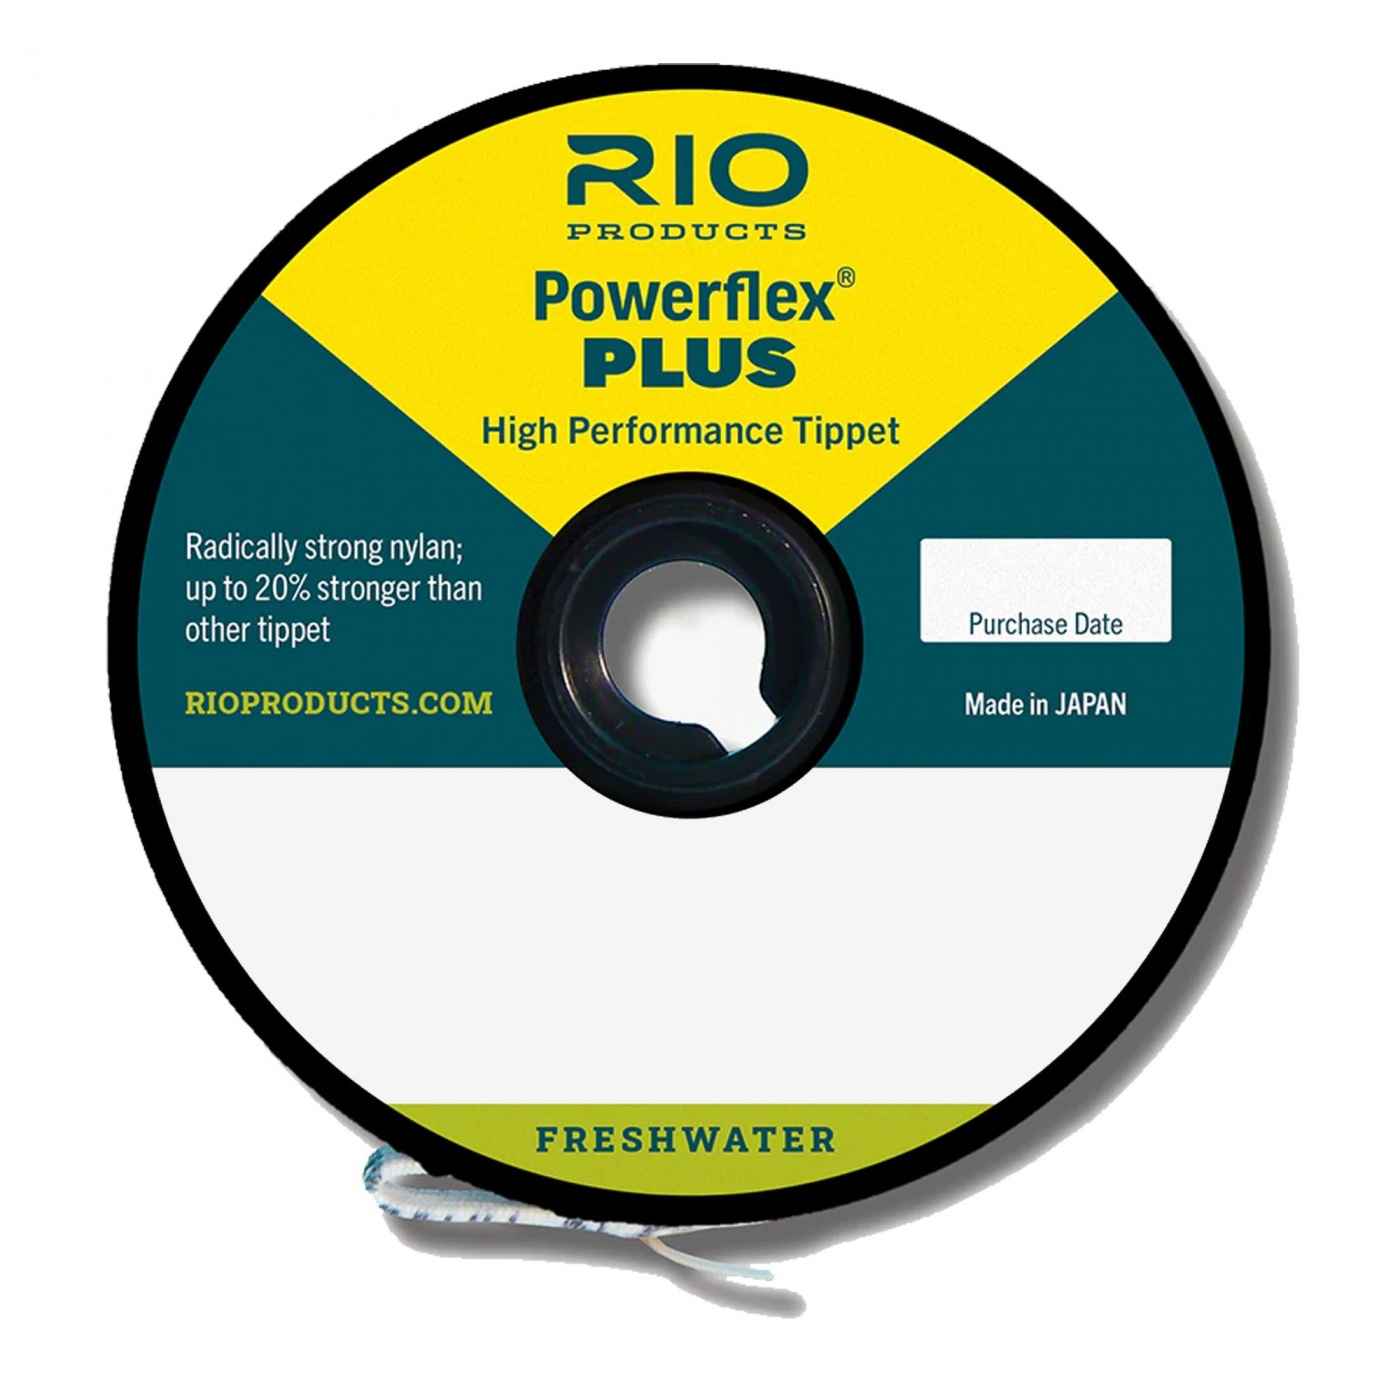 Rio Products Powerflex Plus Tippet Triple Pack 3X-5X For Trout & Grayling Fly Fishing